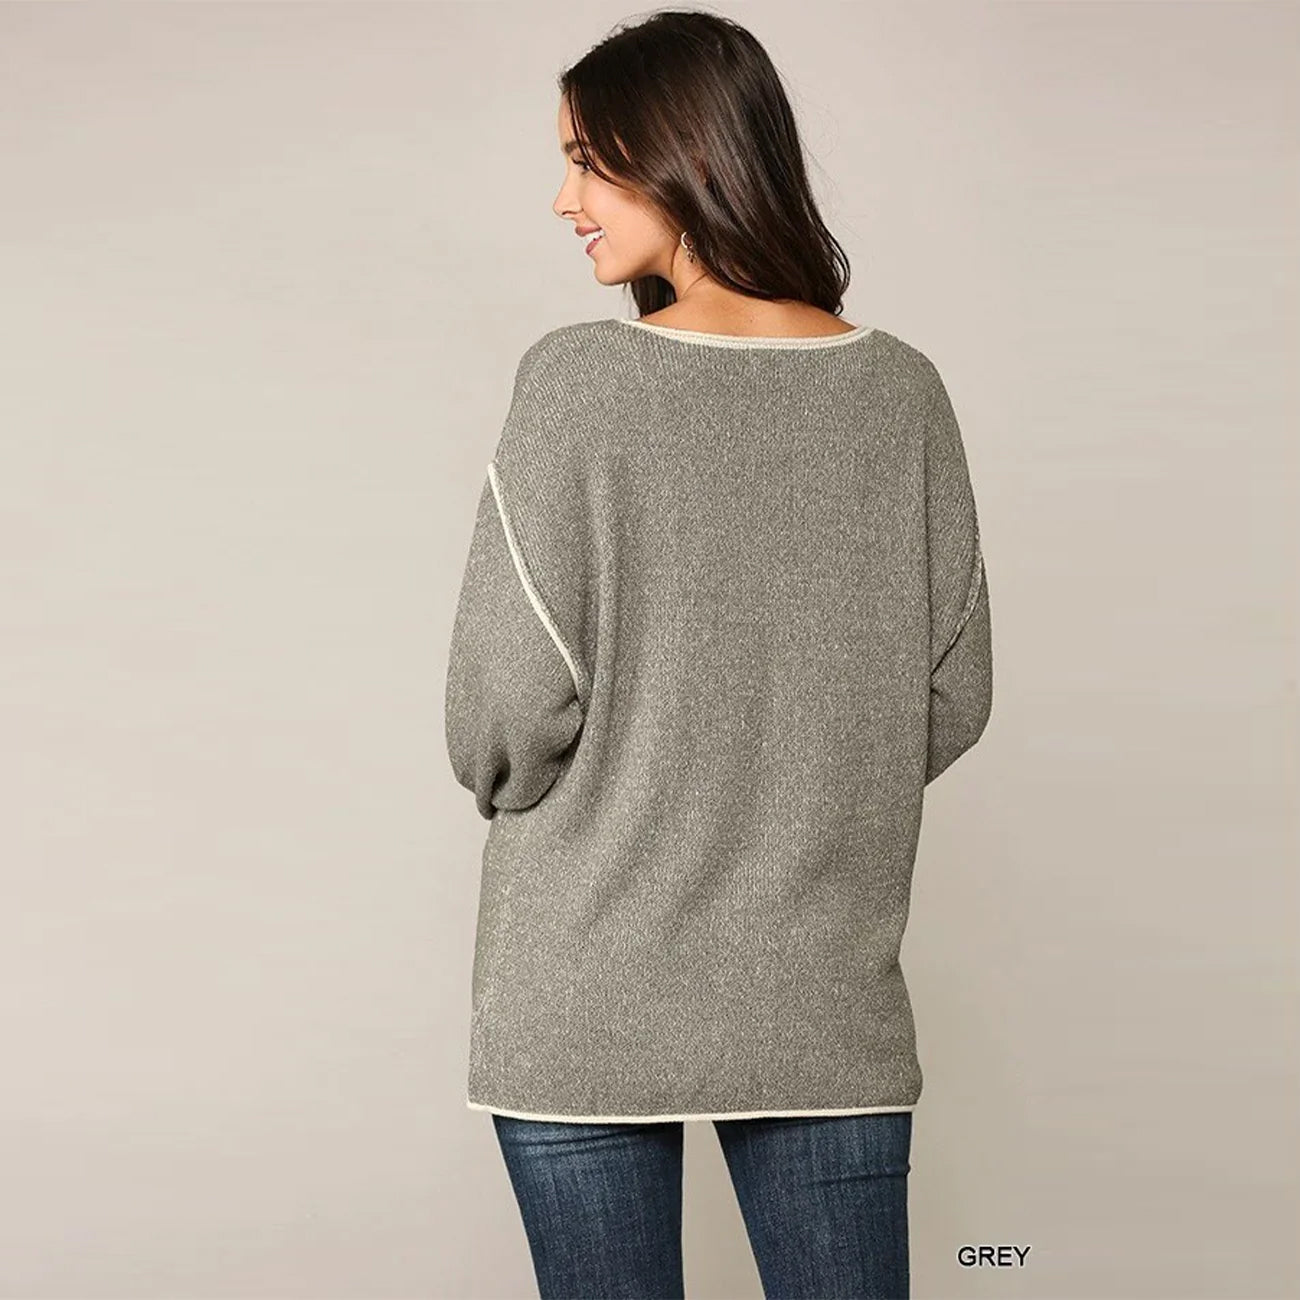 Two-tone Sold Round Neck Sweater Top - Grey